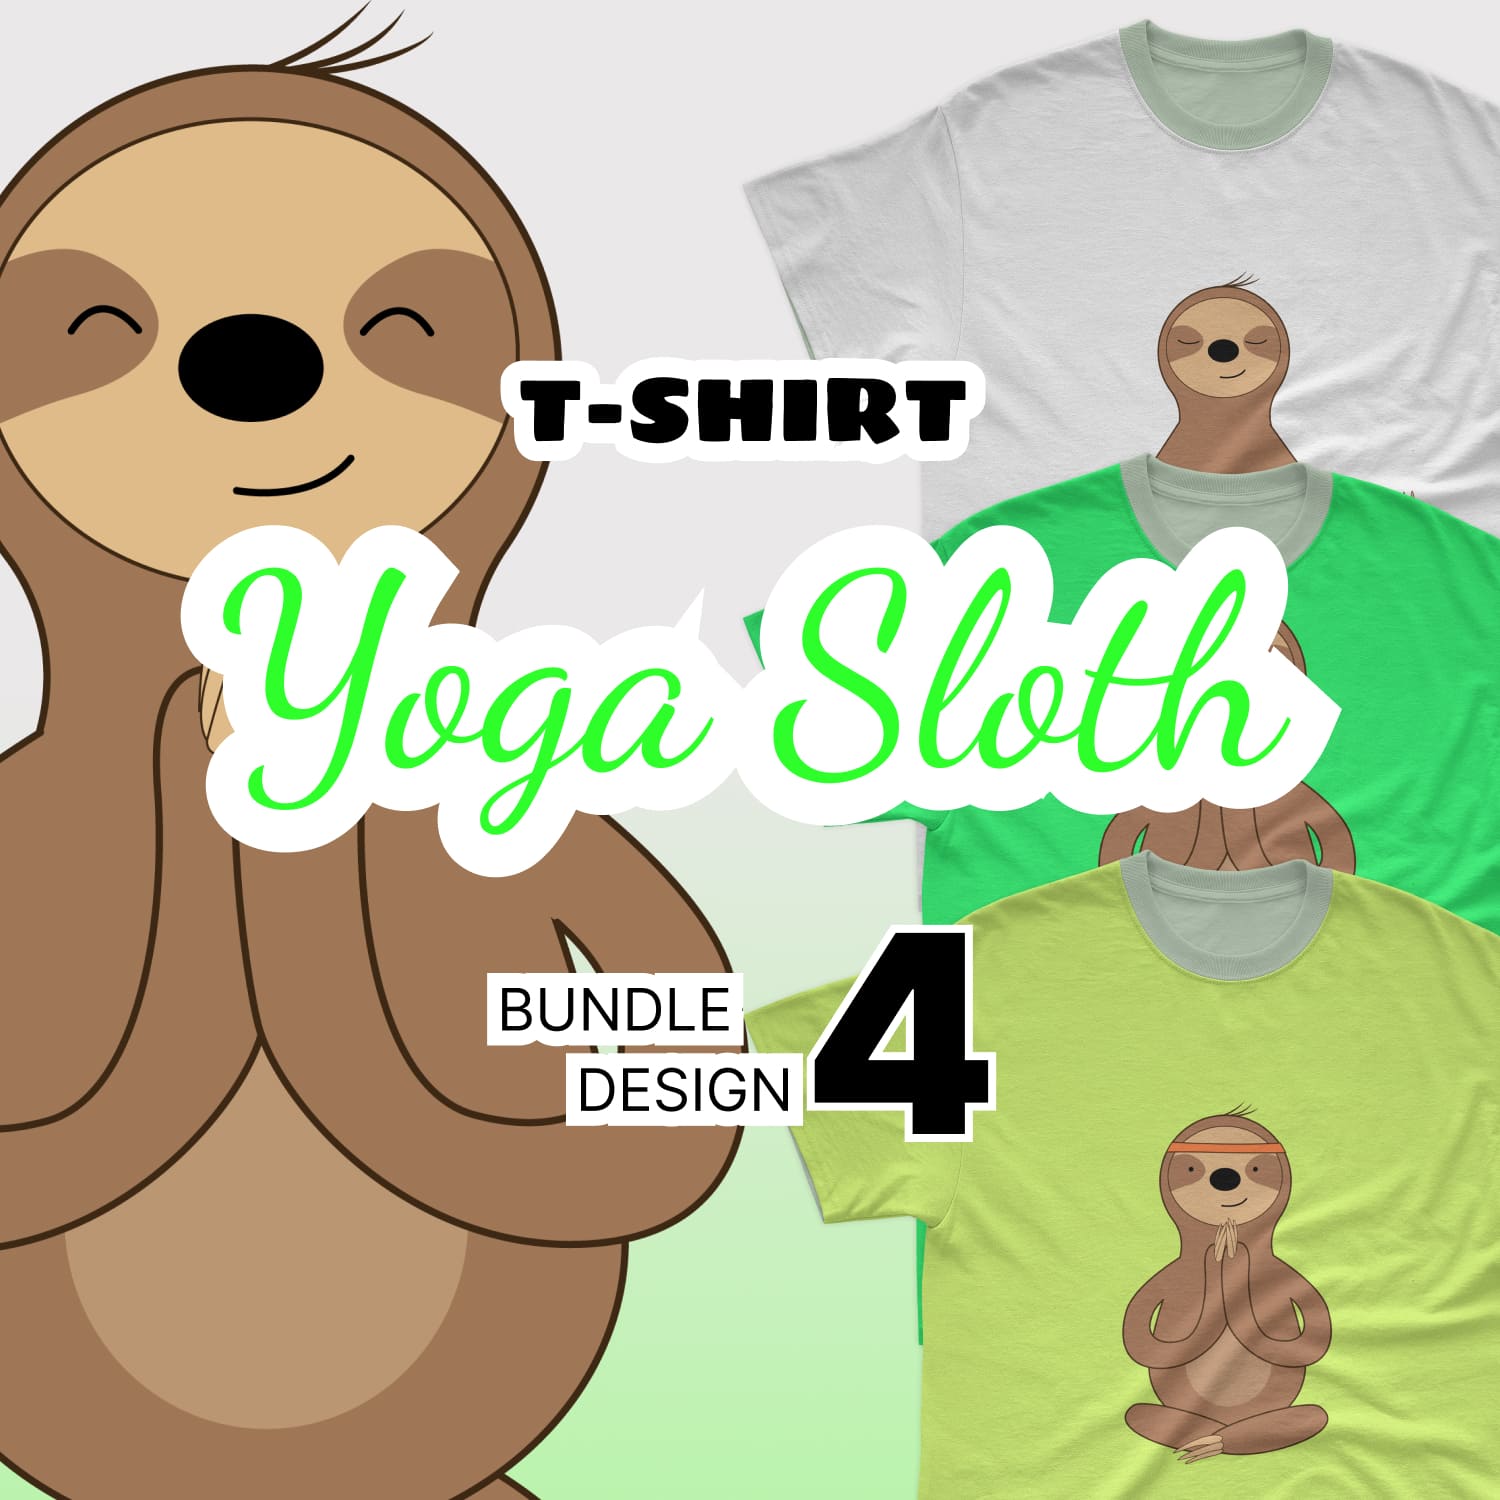 A selection of t-shirts featuring exquisite yogi sloth prints.